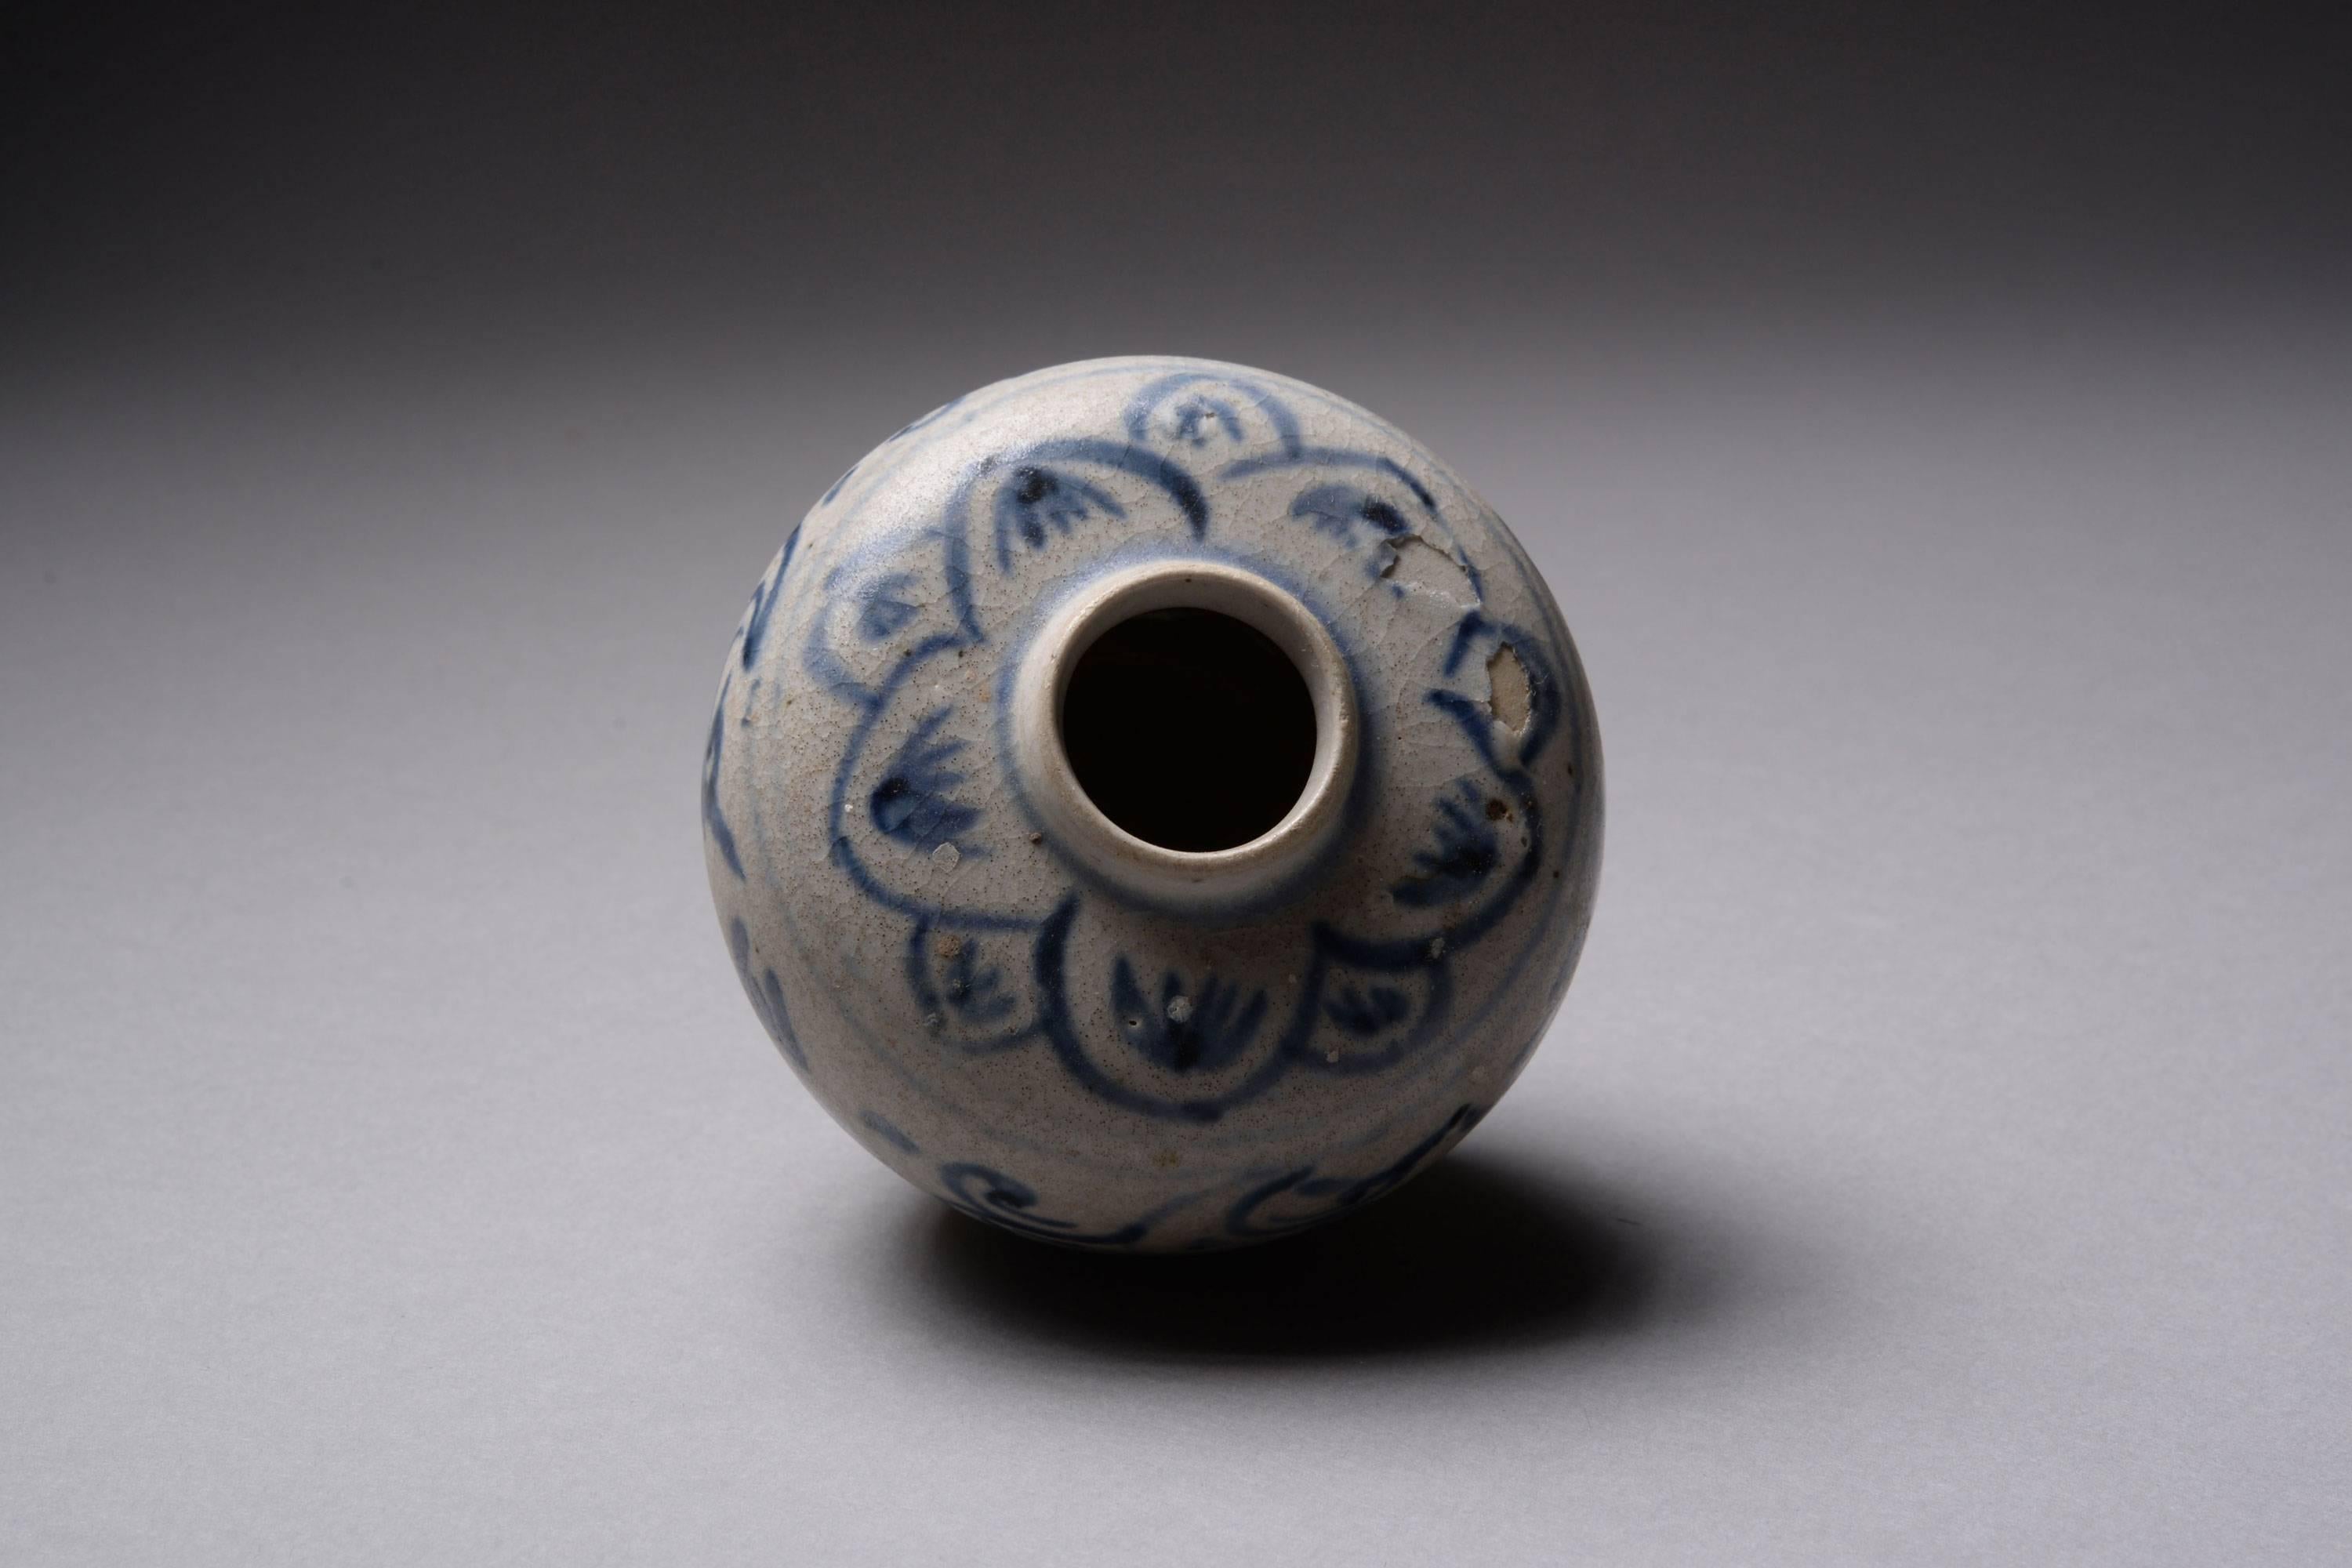 A beautifully preserved example of a Medieval Vietnamese blue and white jarlet, officially salvaged and recorded from the famous Hoi An hoard shipwreck, dating to the mid 15th century.

Of Vietnamese stoneware, the heavy jarlet is beautifully and